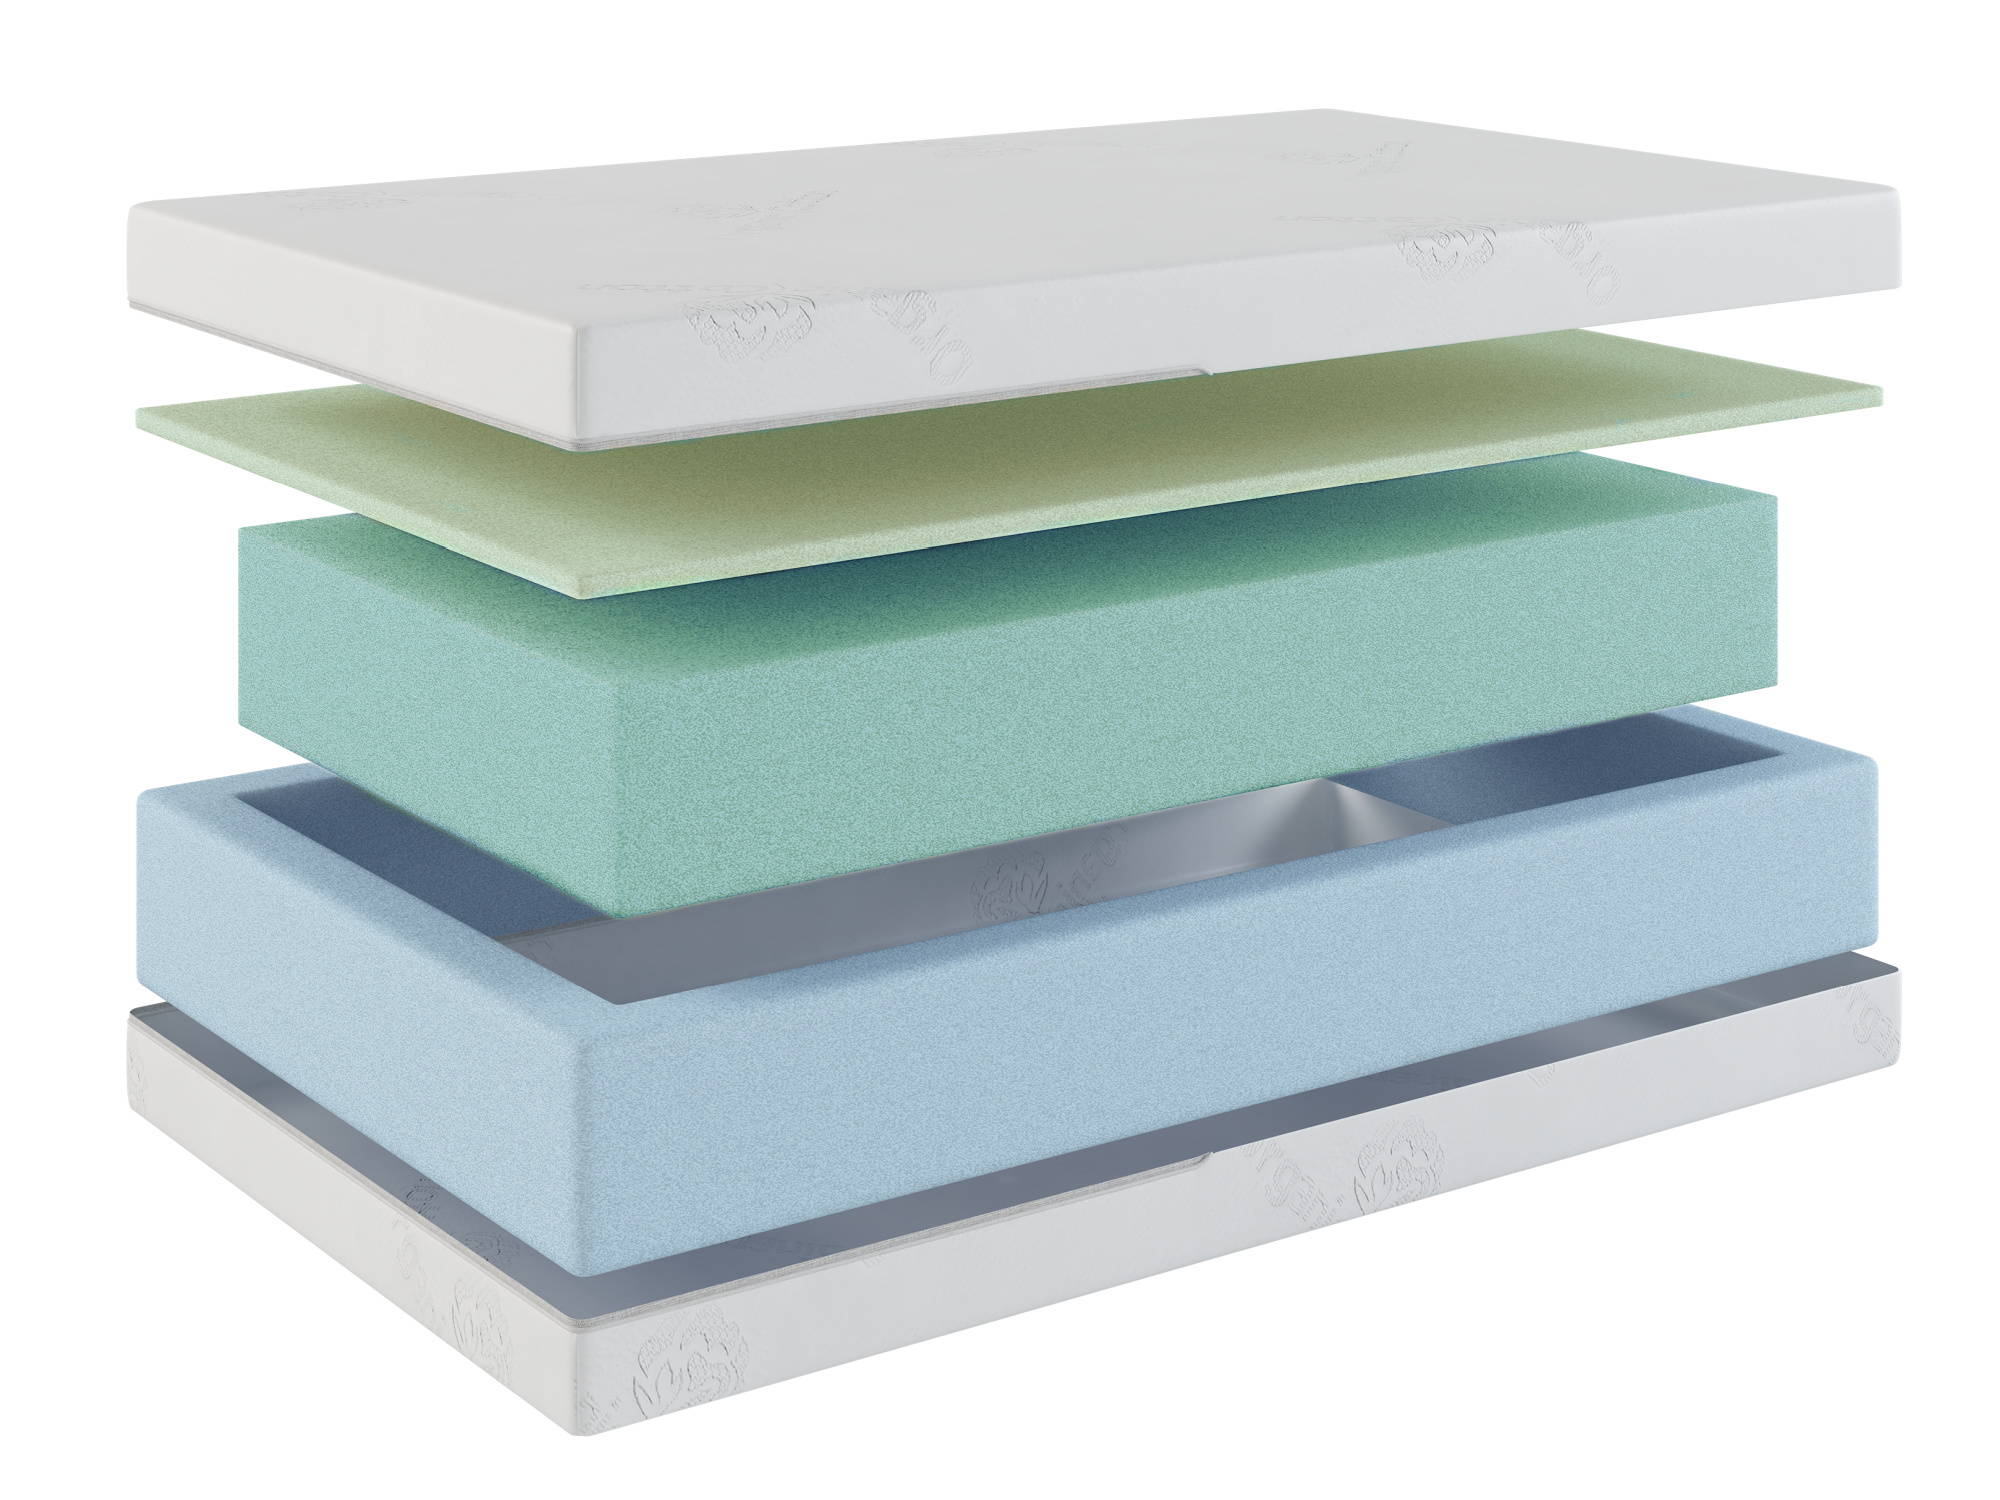 Two-Stage Organic Luxe breathable crib mattress layer showing three internal layers.